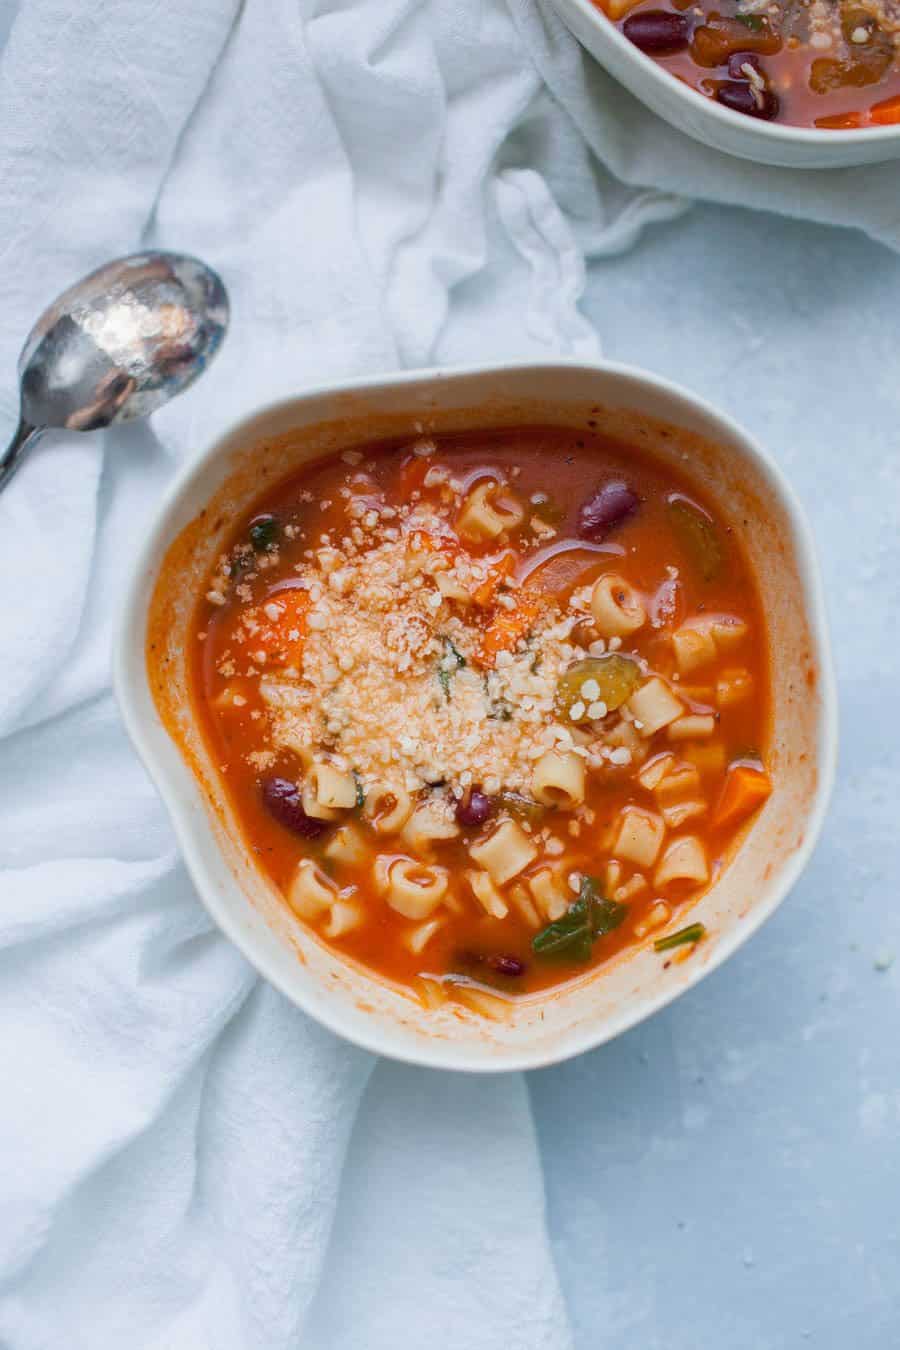 Fall is just around the corner which means it's soup season! You won't need to slave over this one all day though, this quick minestrone soup is packed with veggies and flavor and can be made quickly. This classic soup is hearty and satisfying.